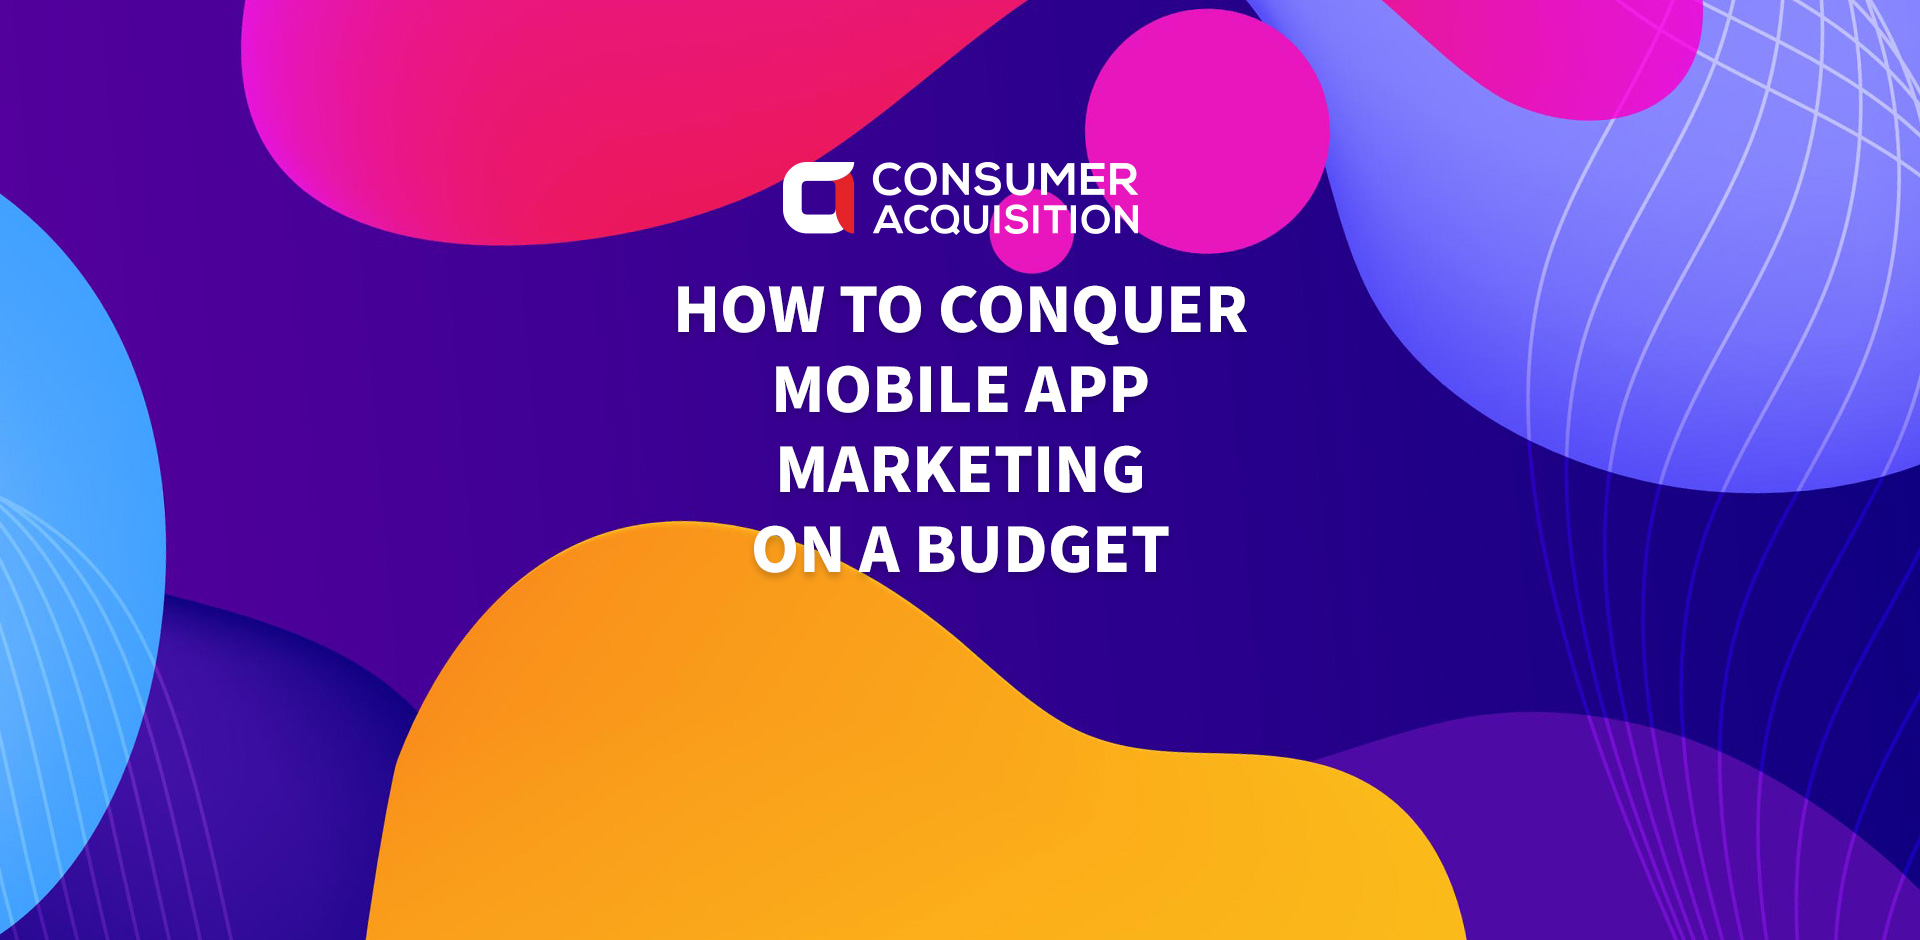 How to Conquer Mobile App Marketing on a Budget